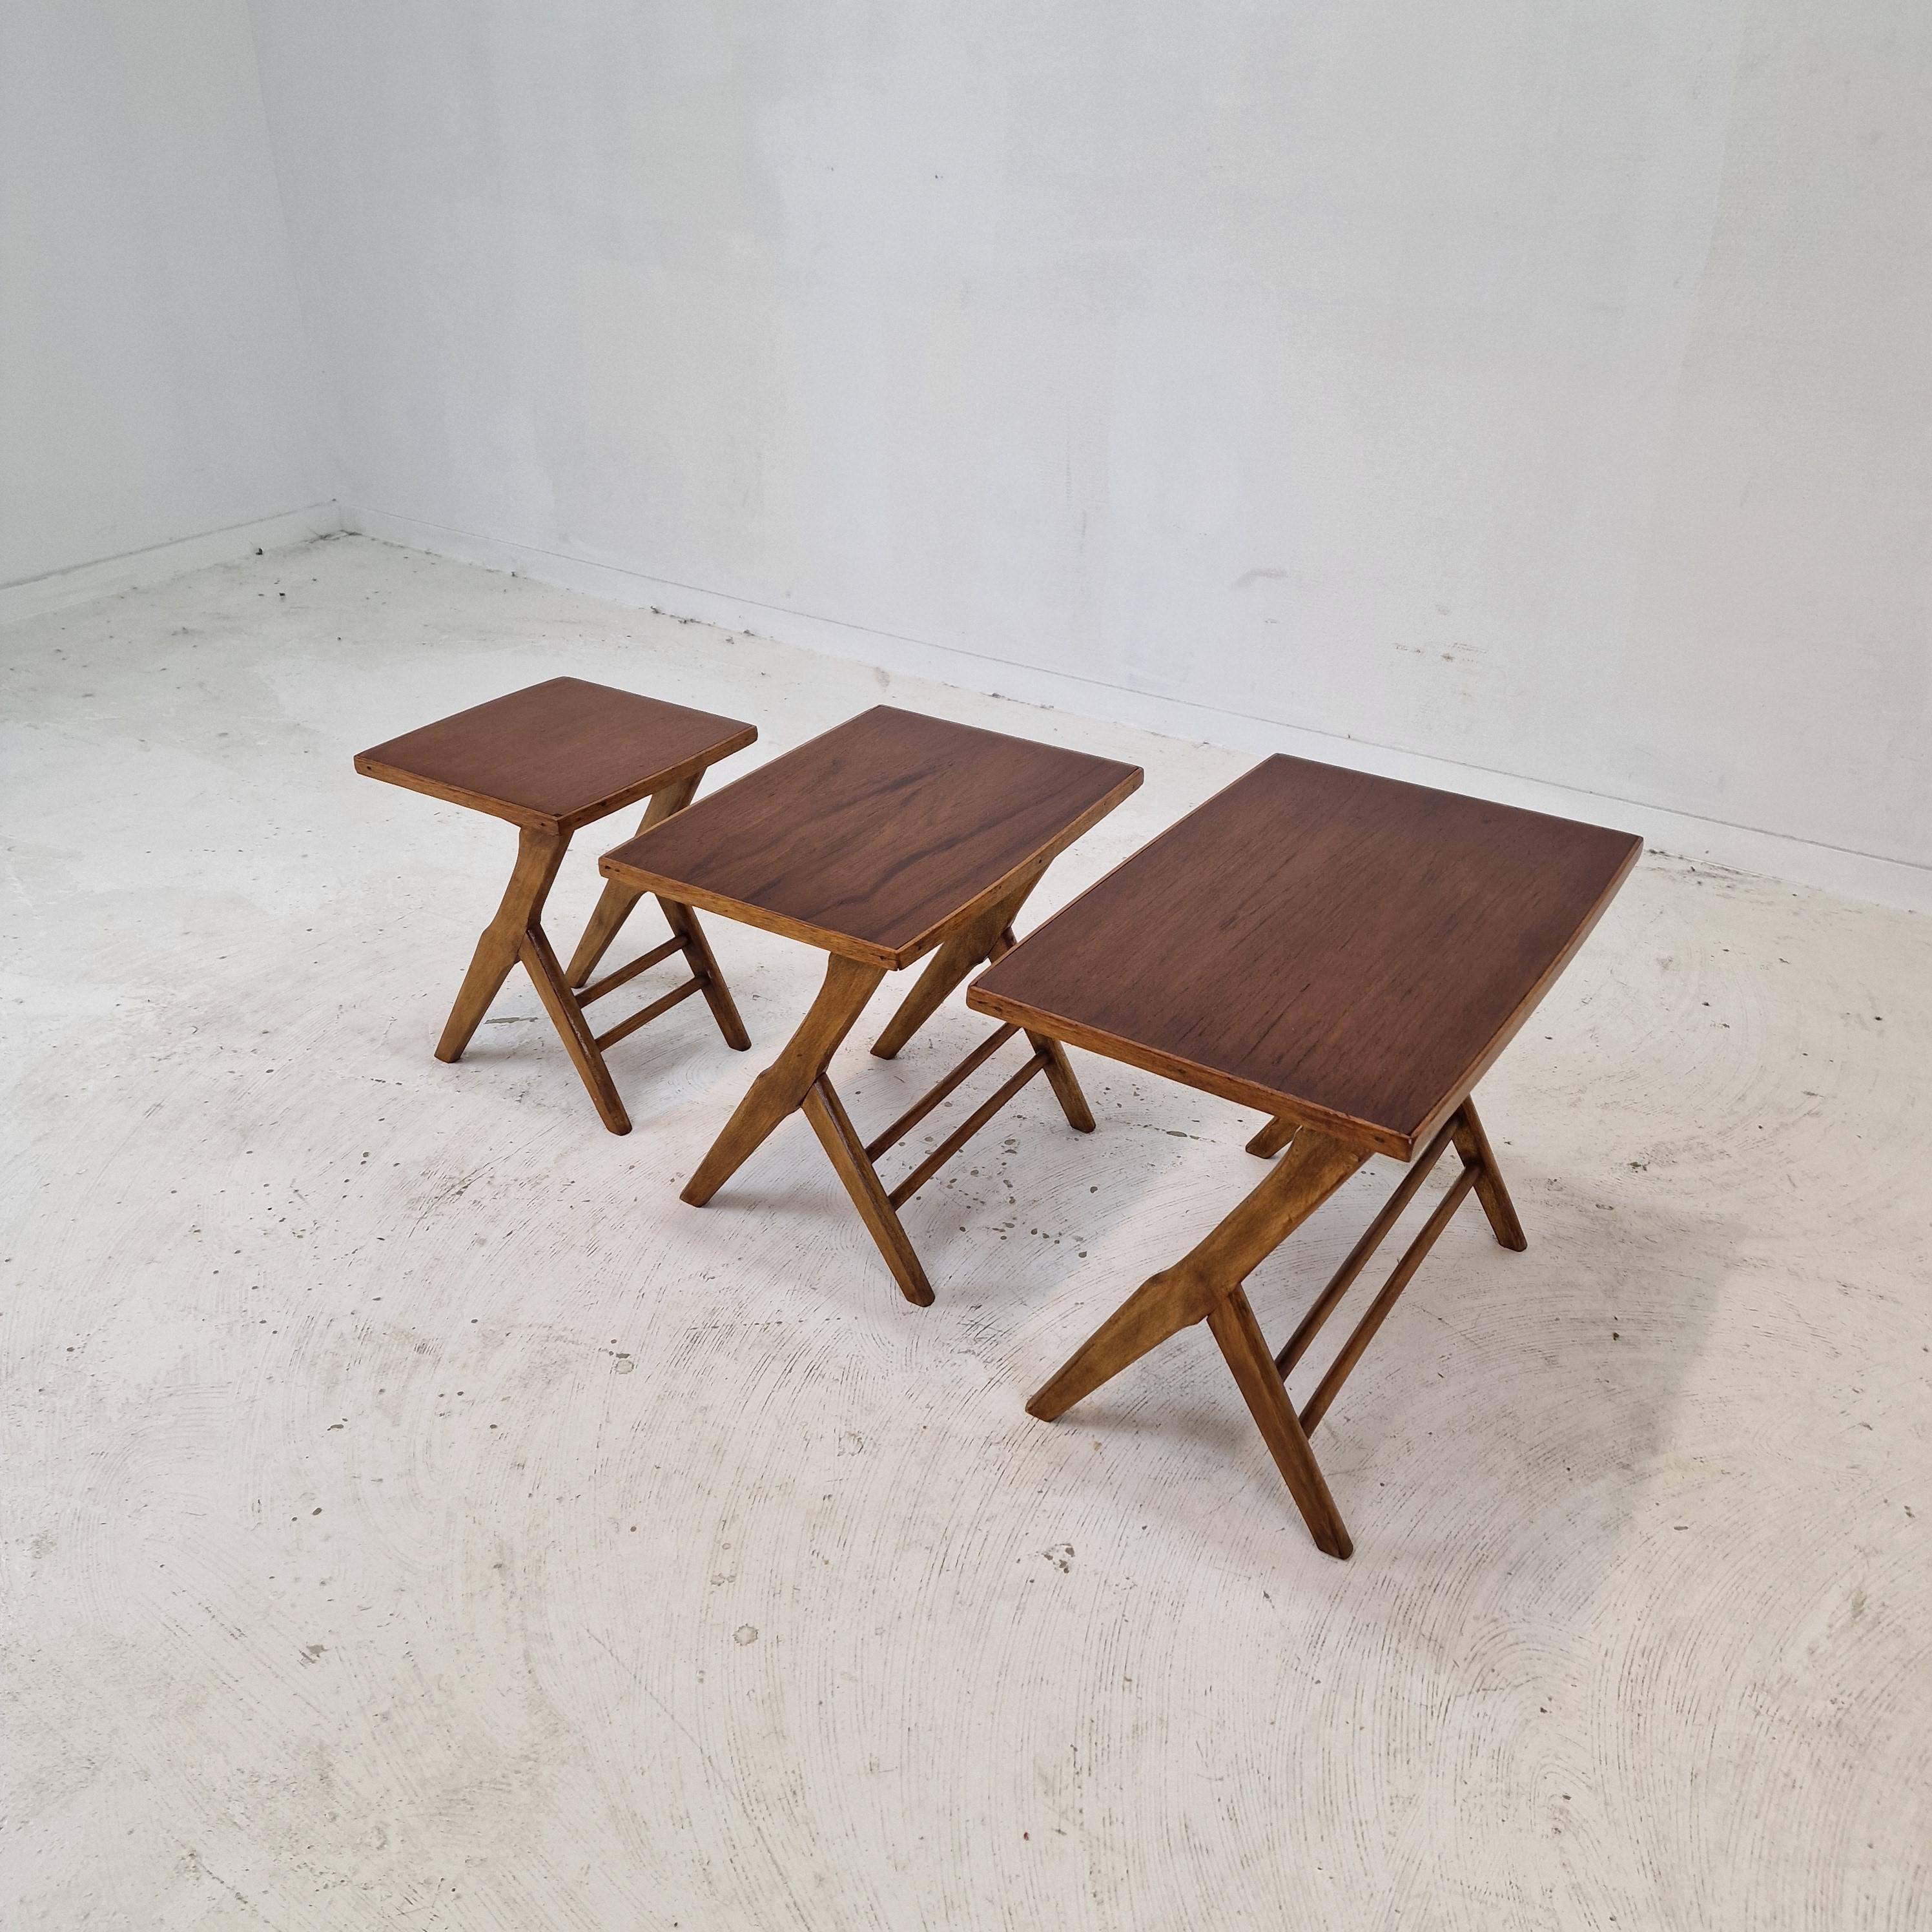 Dutch Set of 3 Wooden Nesting Tables, Holland 1960s For Sale